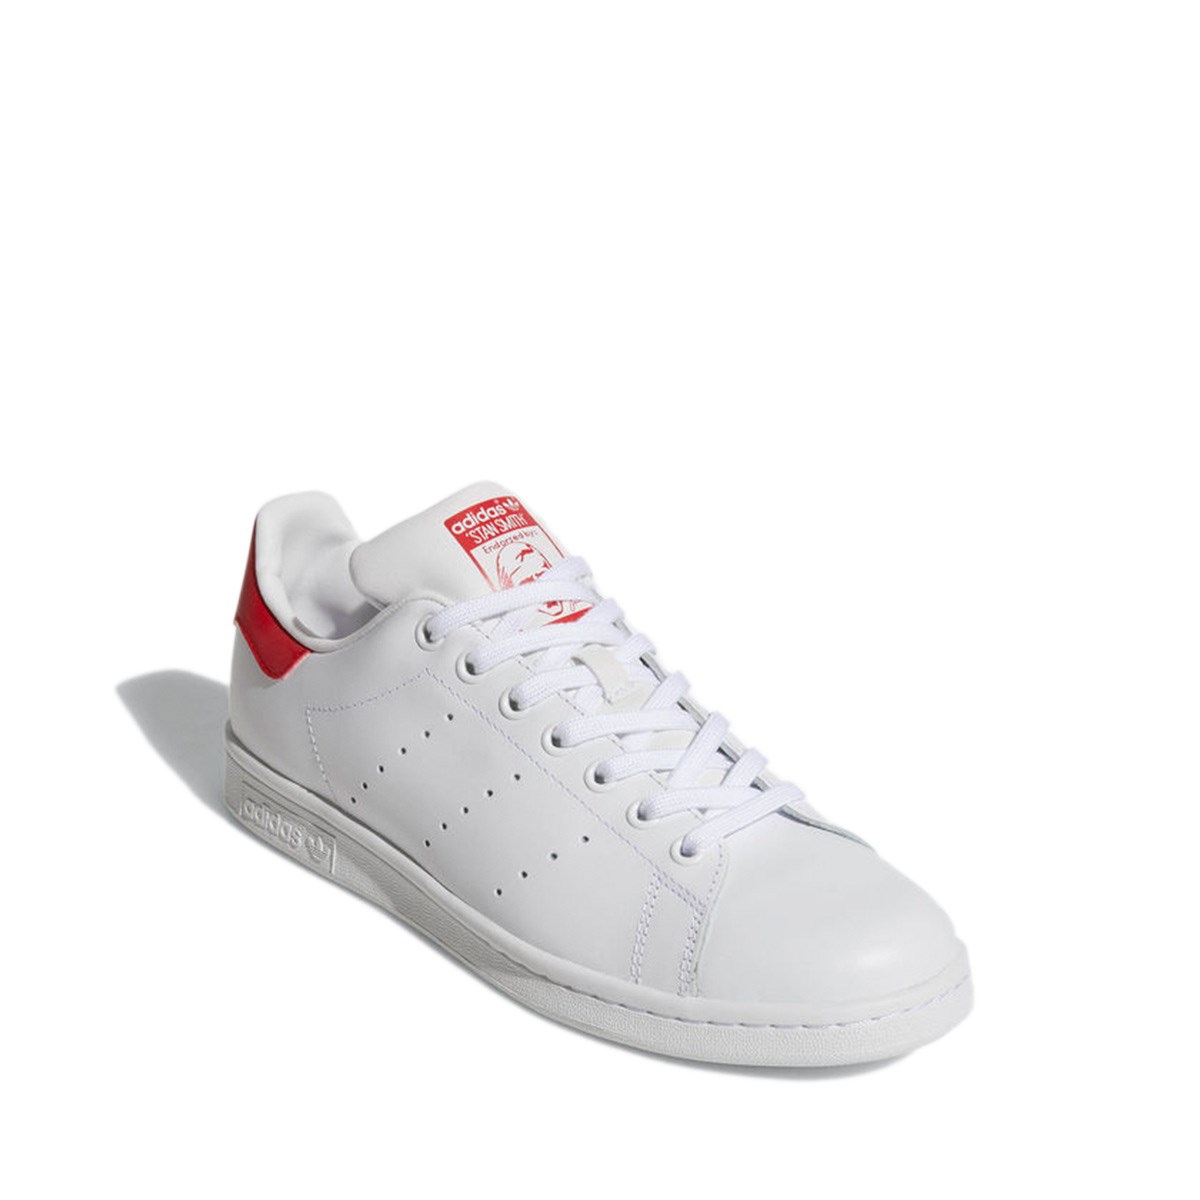 all red stan smith adidas